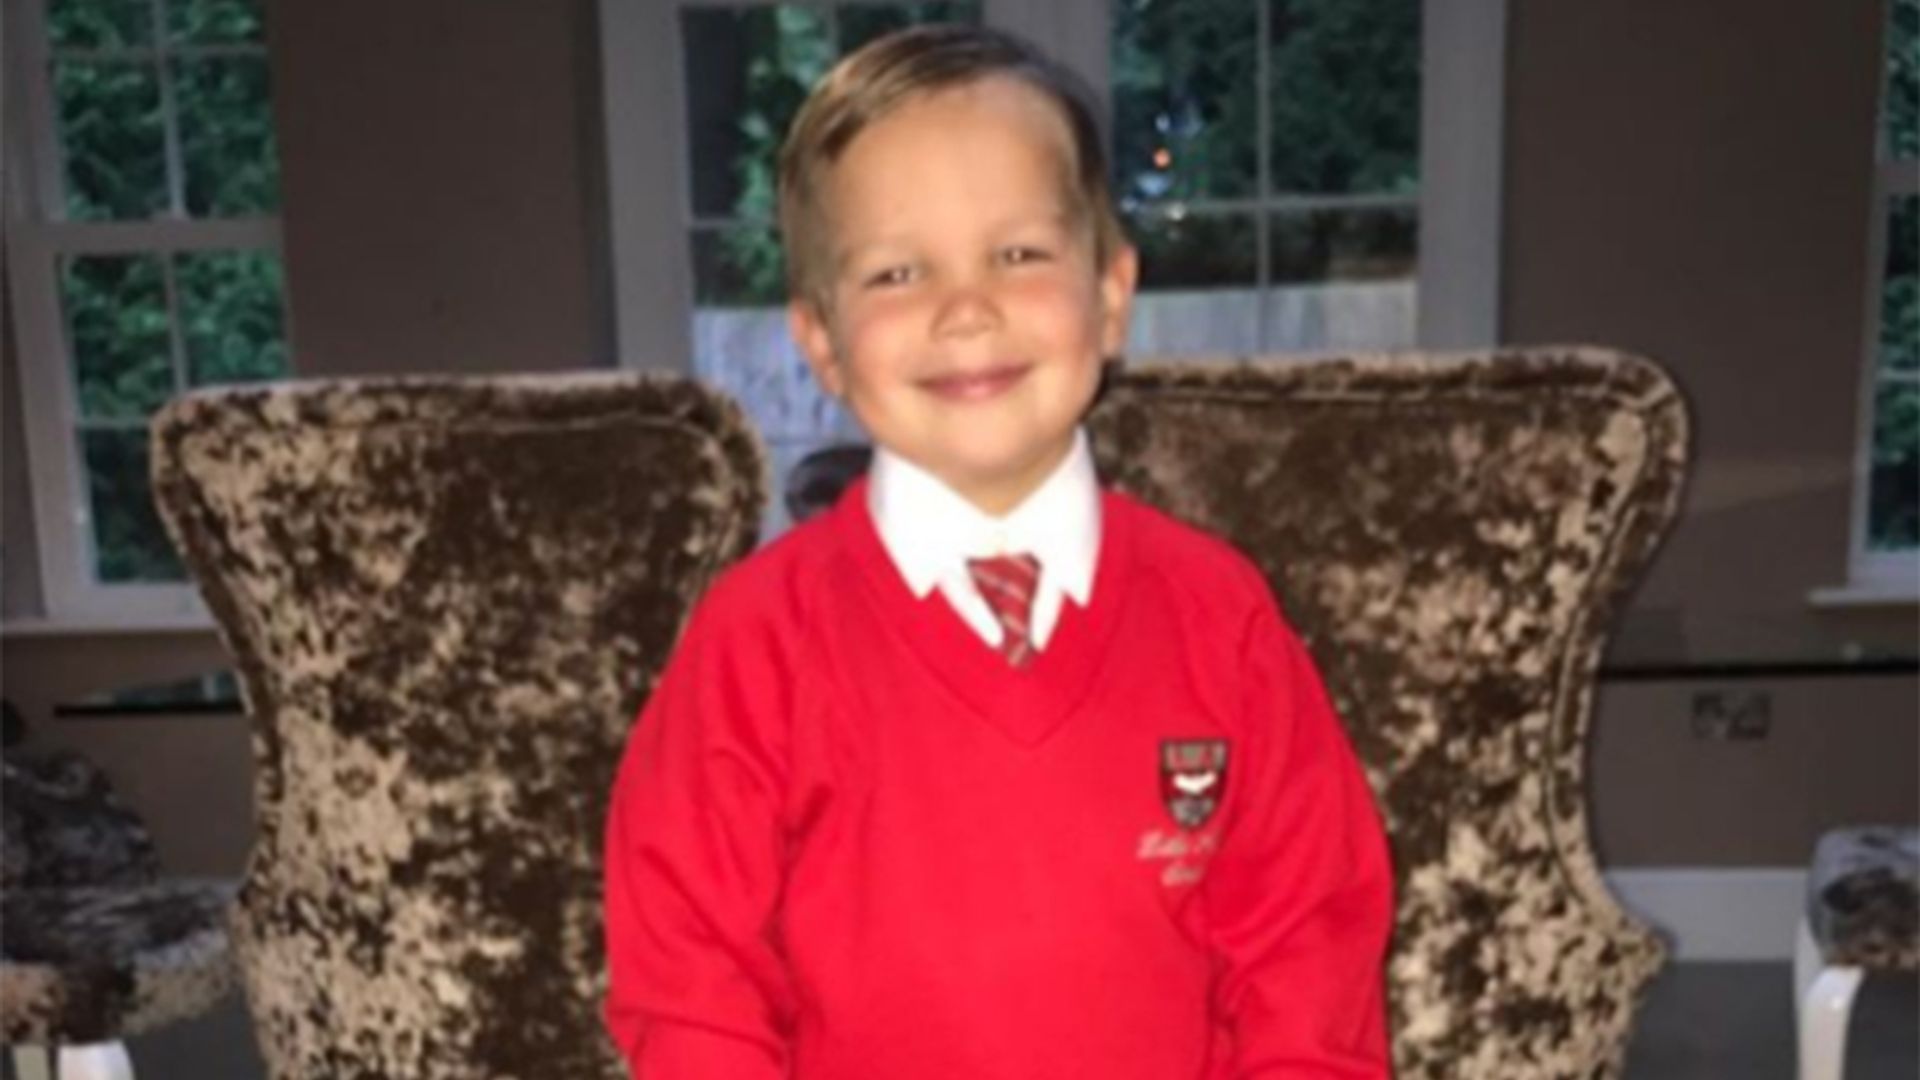 Danielle Lloyd shares adorable photos of sons starting school